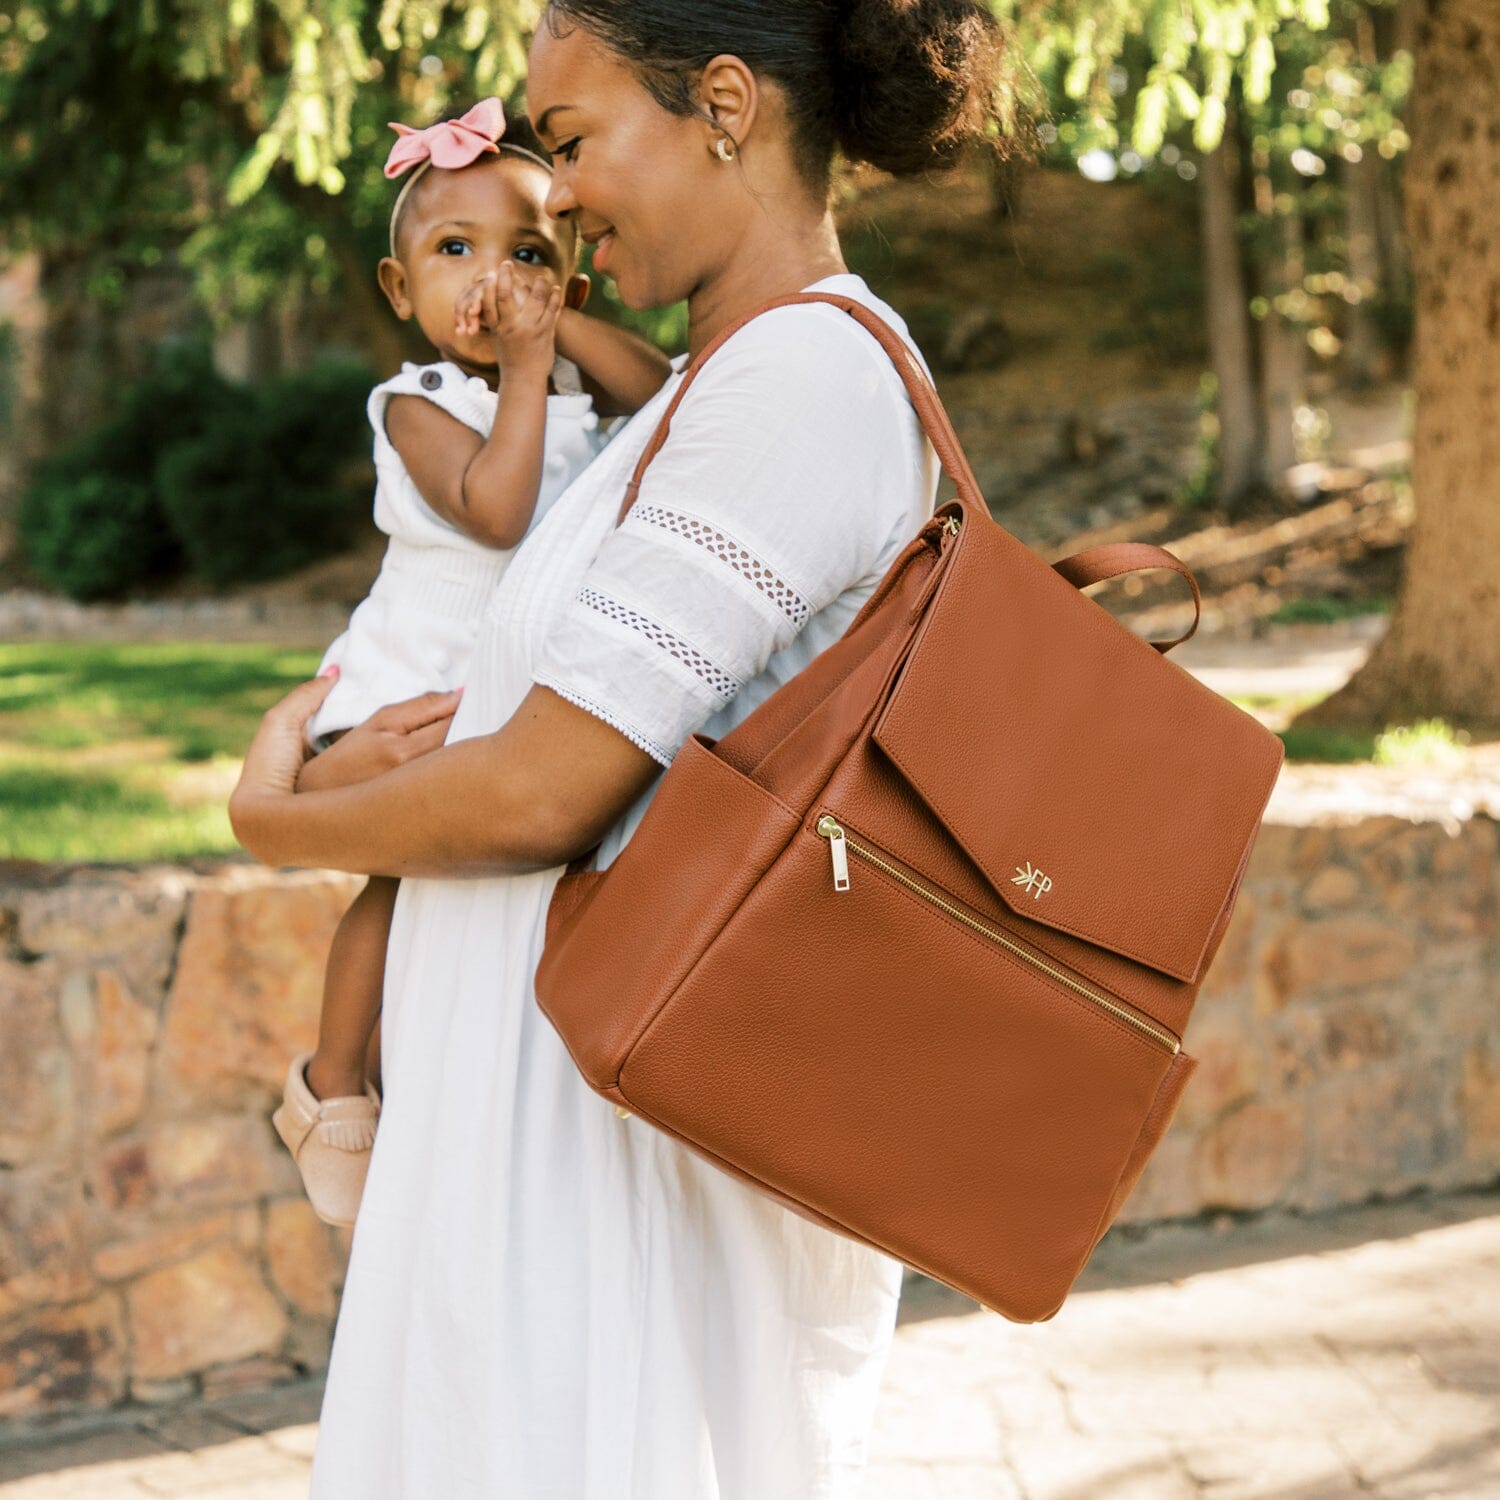  Freshly Picked Classic Leather Diaper Bag Convertible